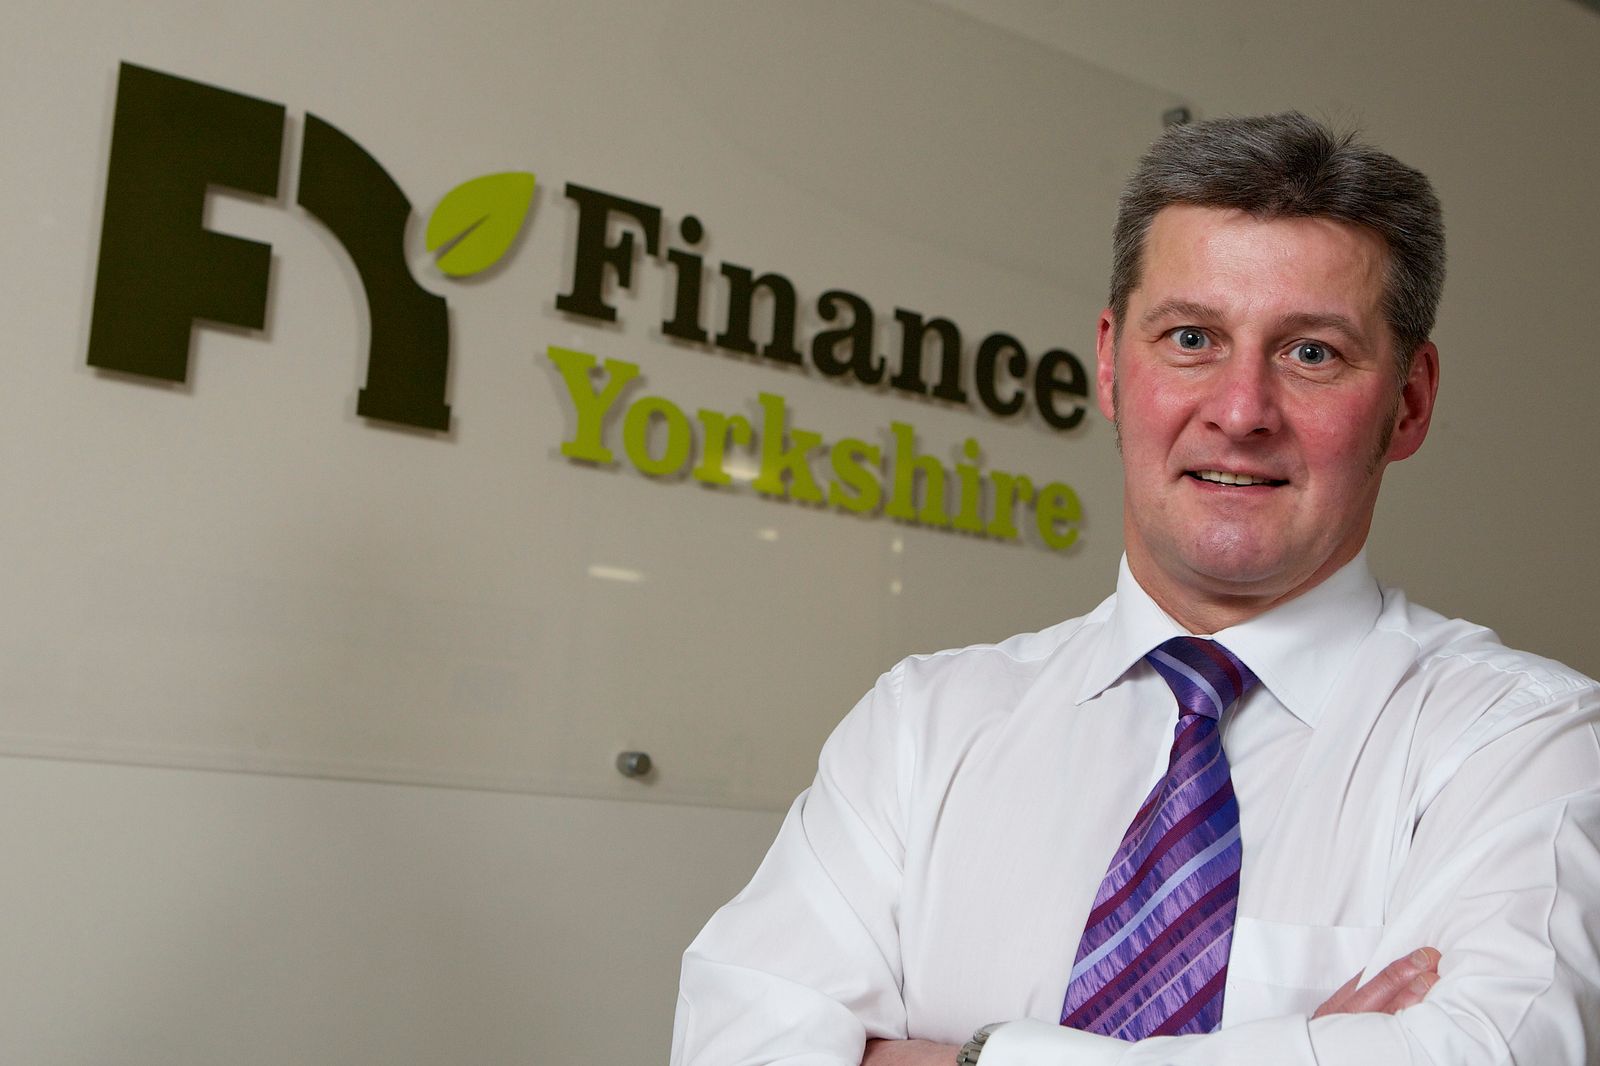 Finance Yorkshire secures multi-million pound exit from Faradion